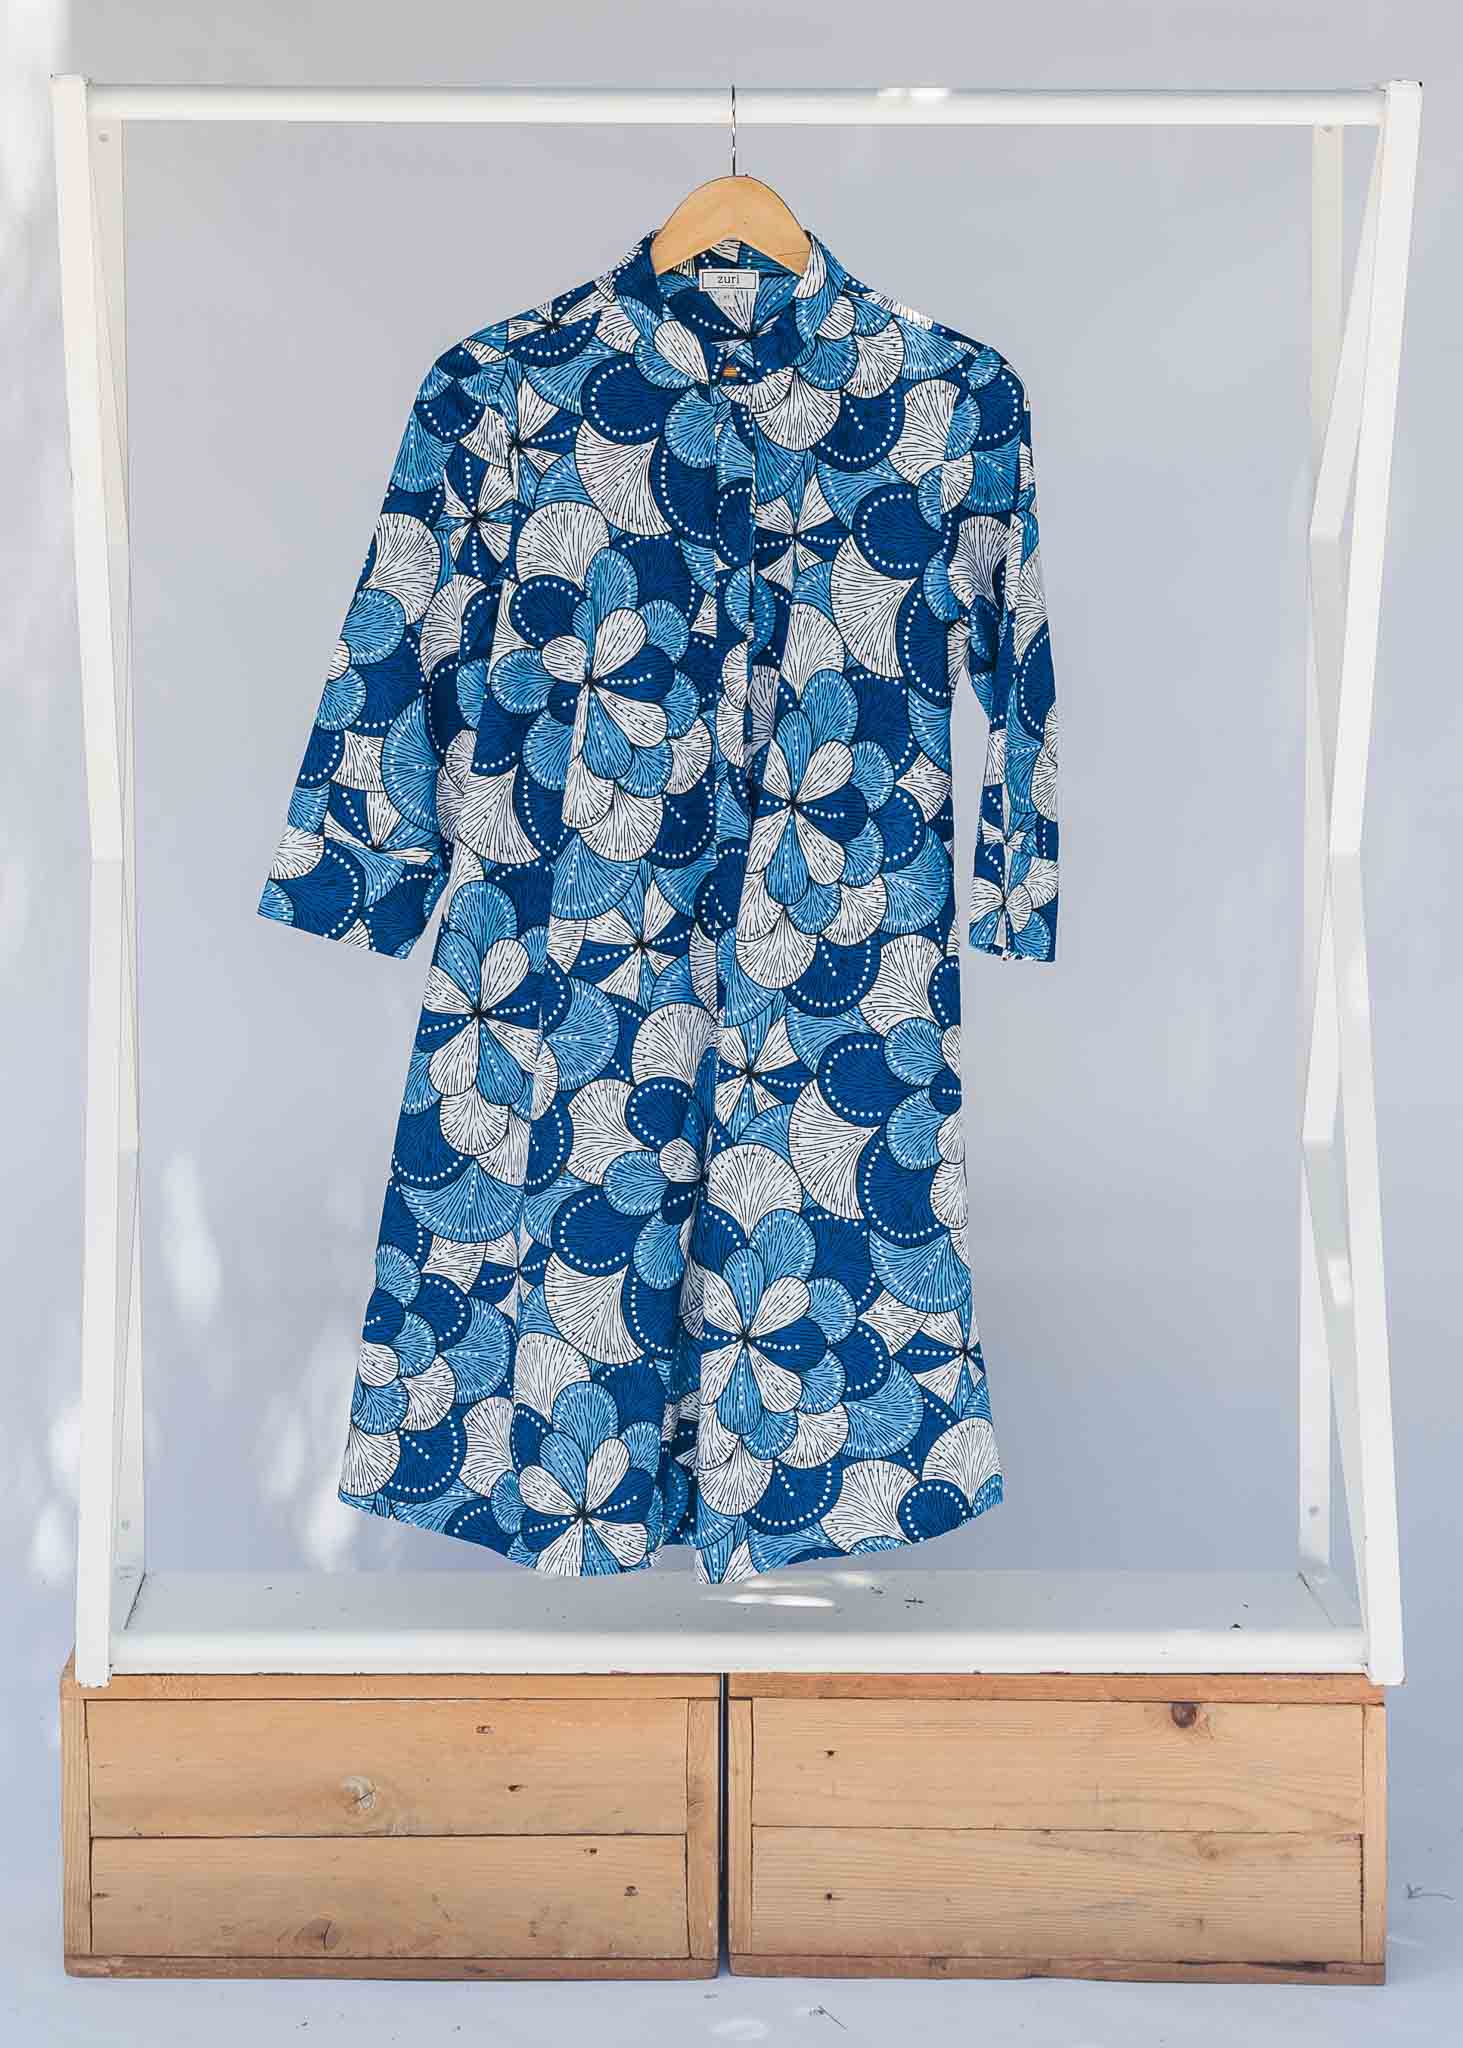 Display of blue and white floral print dress.